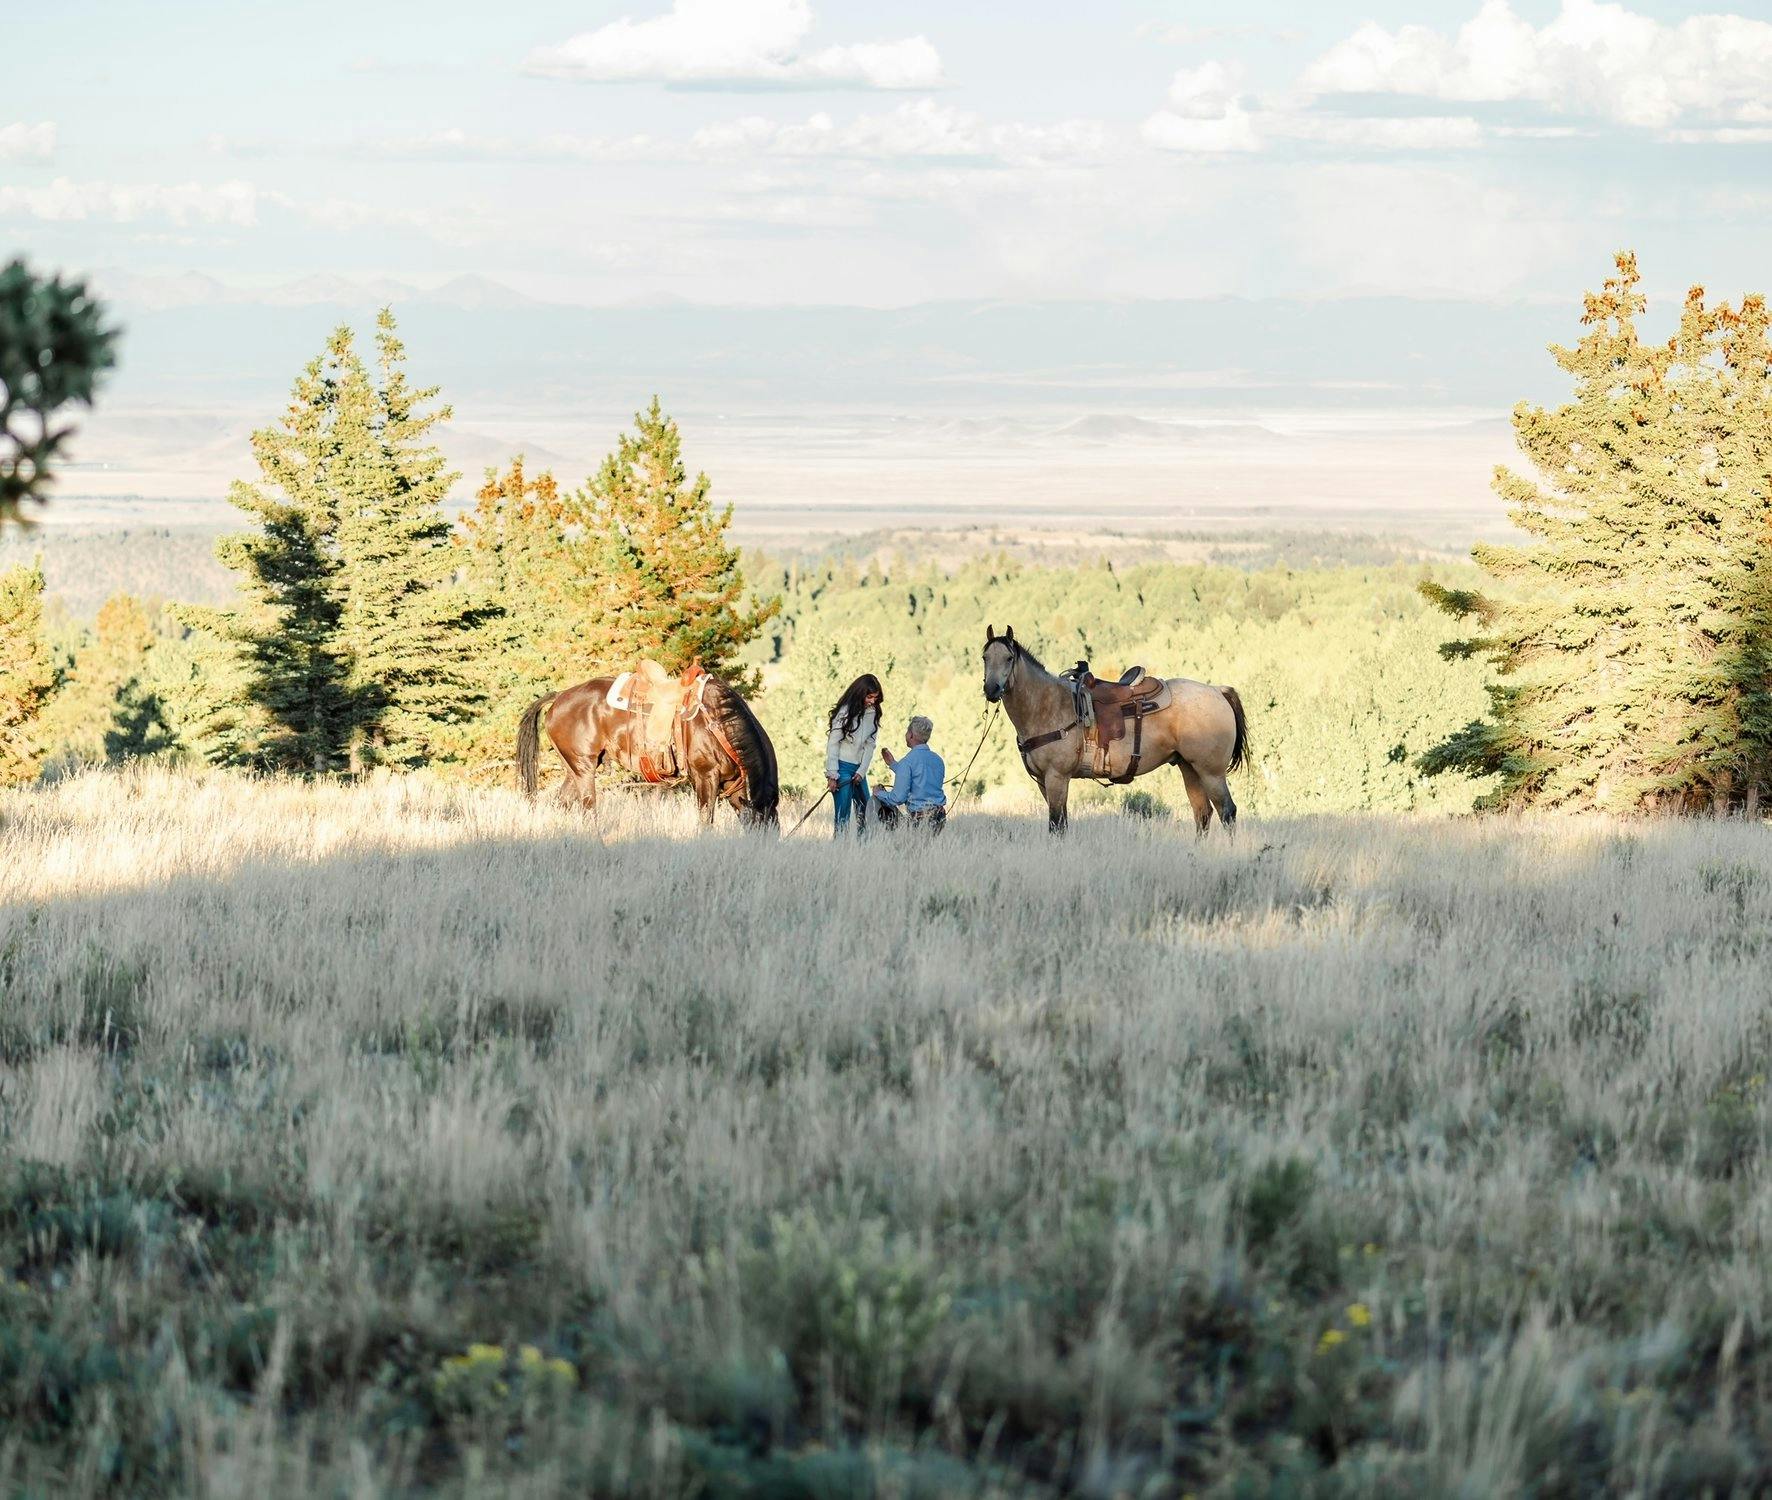 a man proposing to his girlfriend in a field of grass with a horse next to each of them.